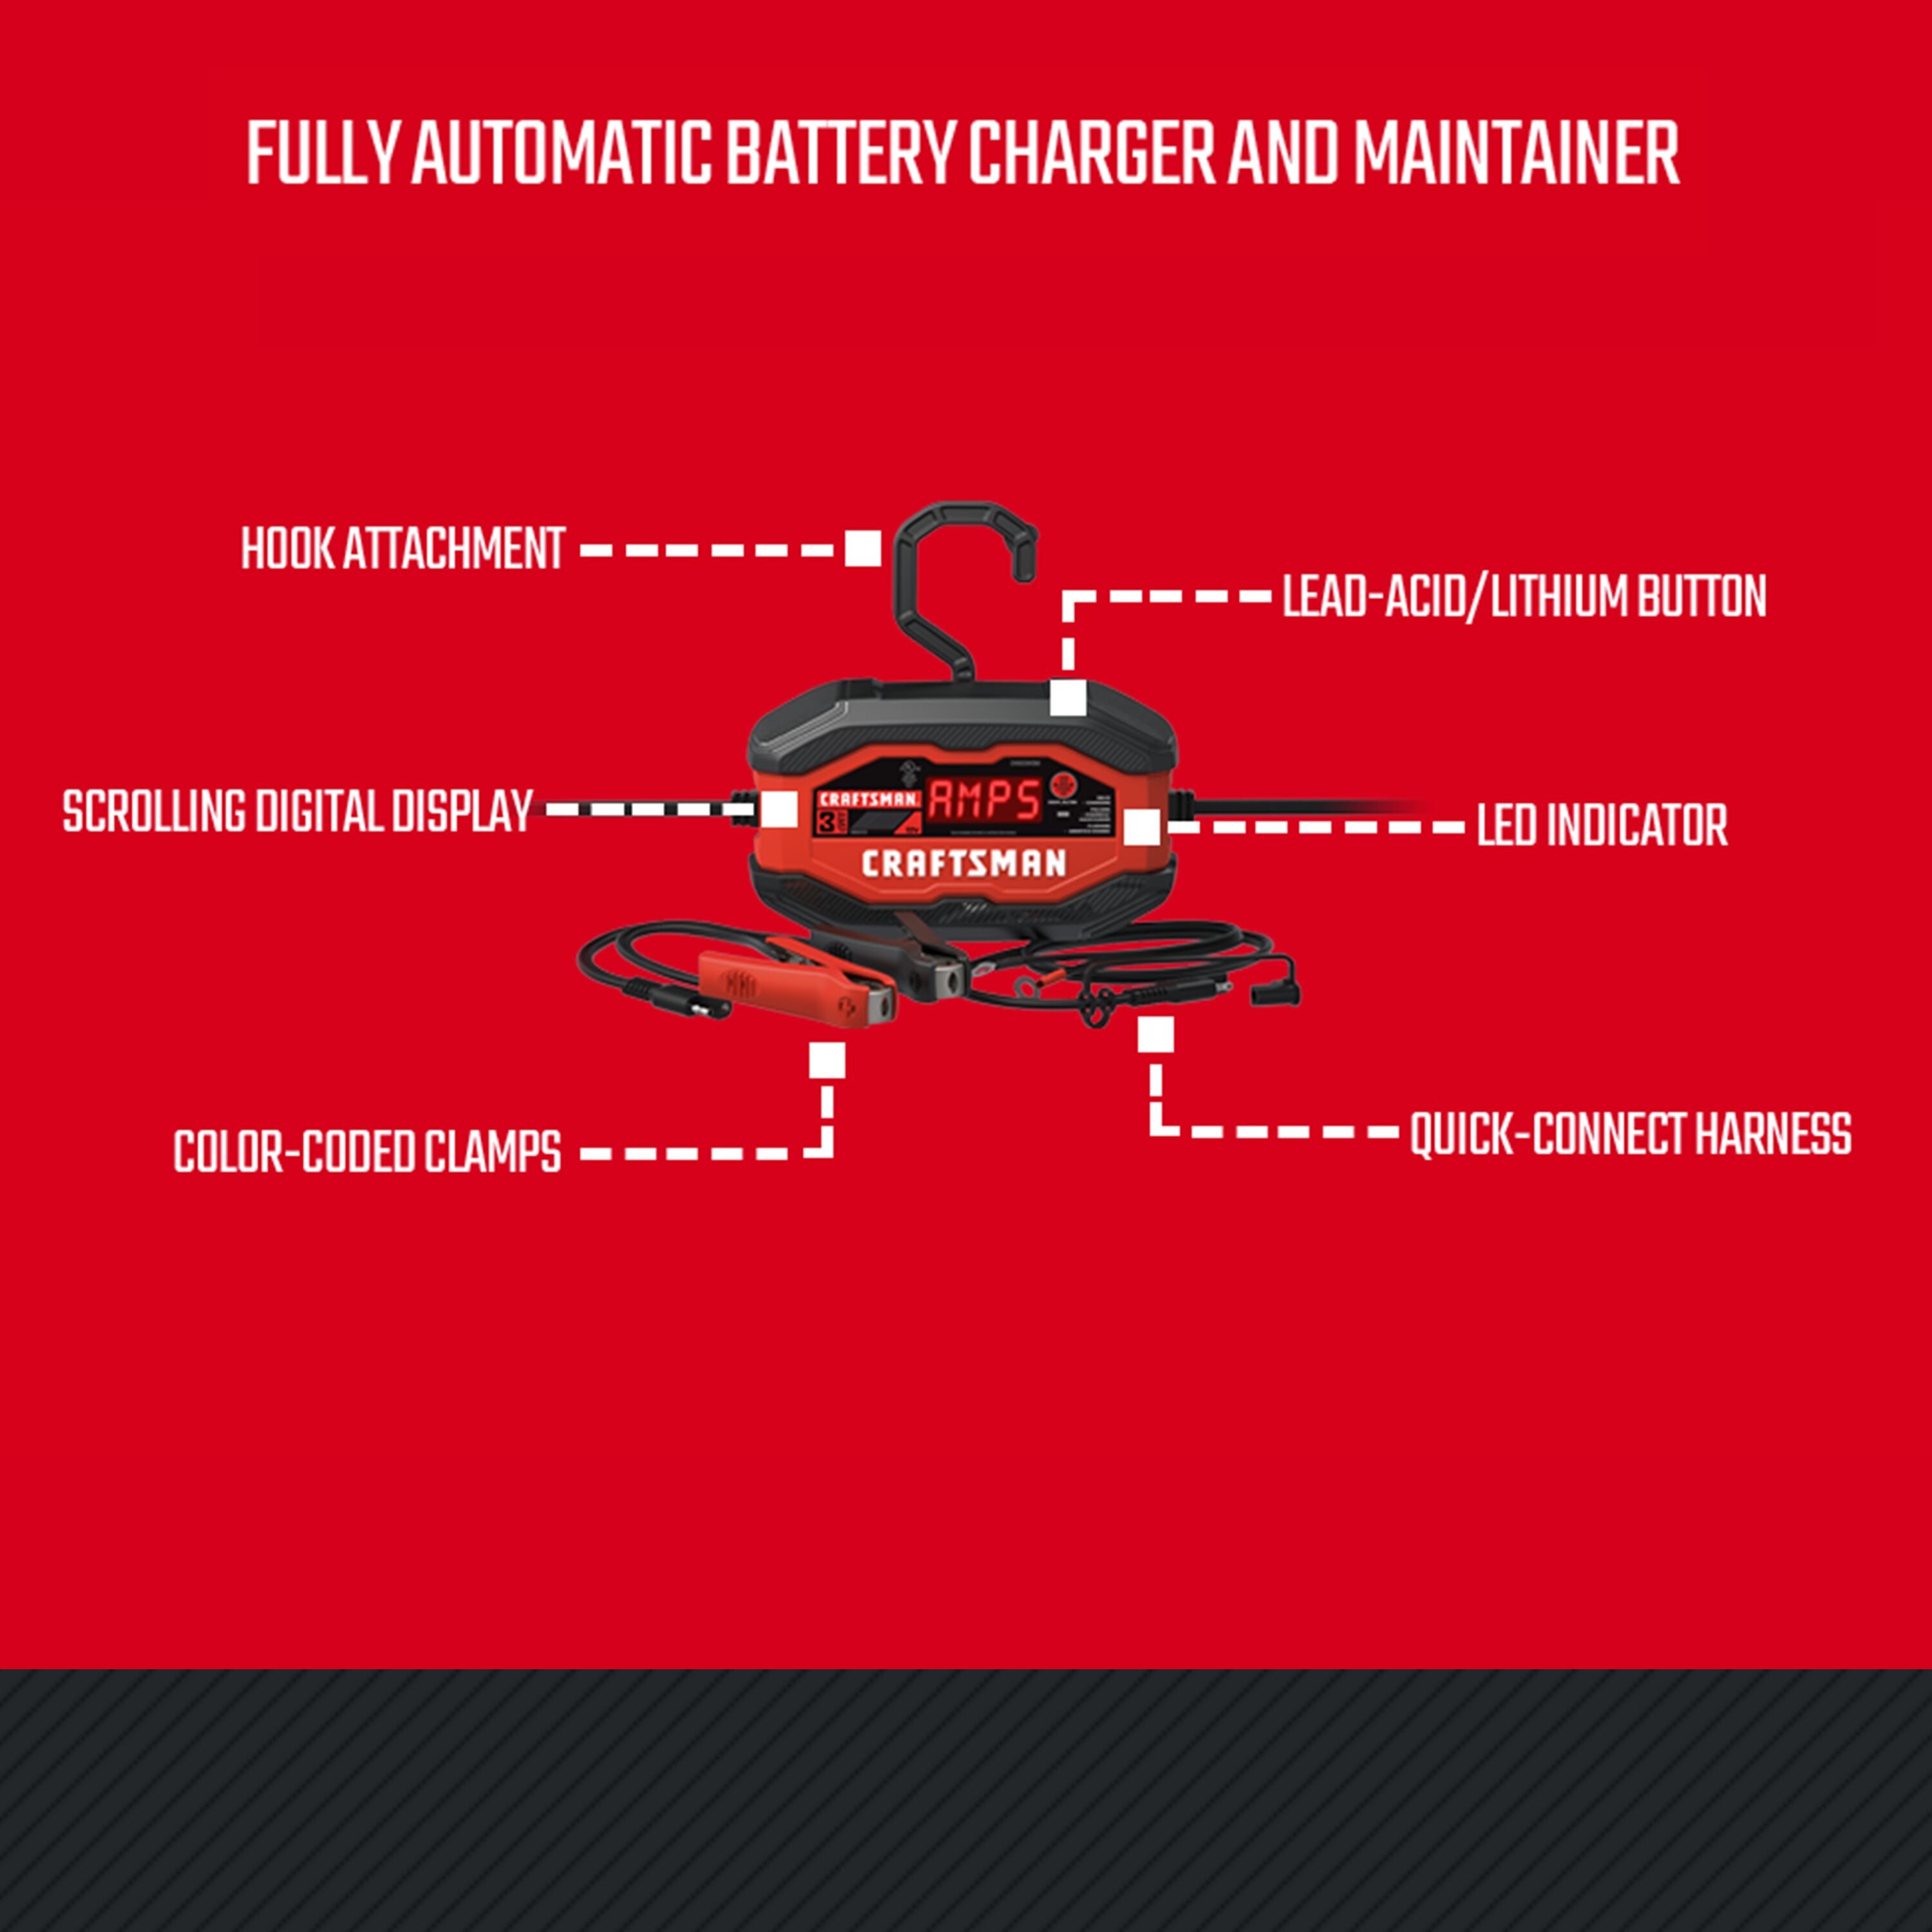 3A 12V Fully Automatic Battery Charger and Maintainer rear view